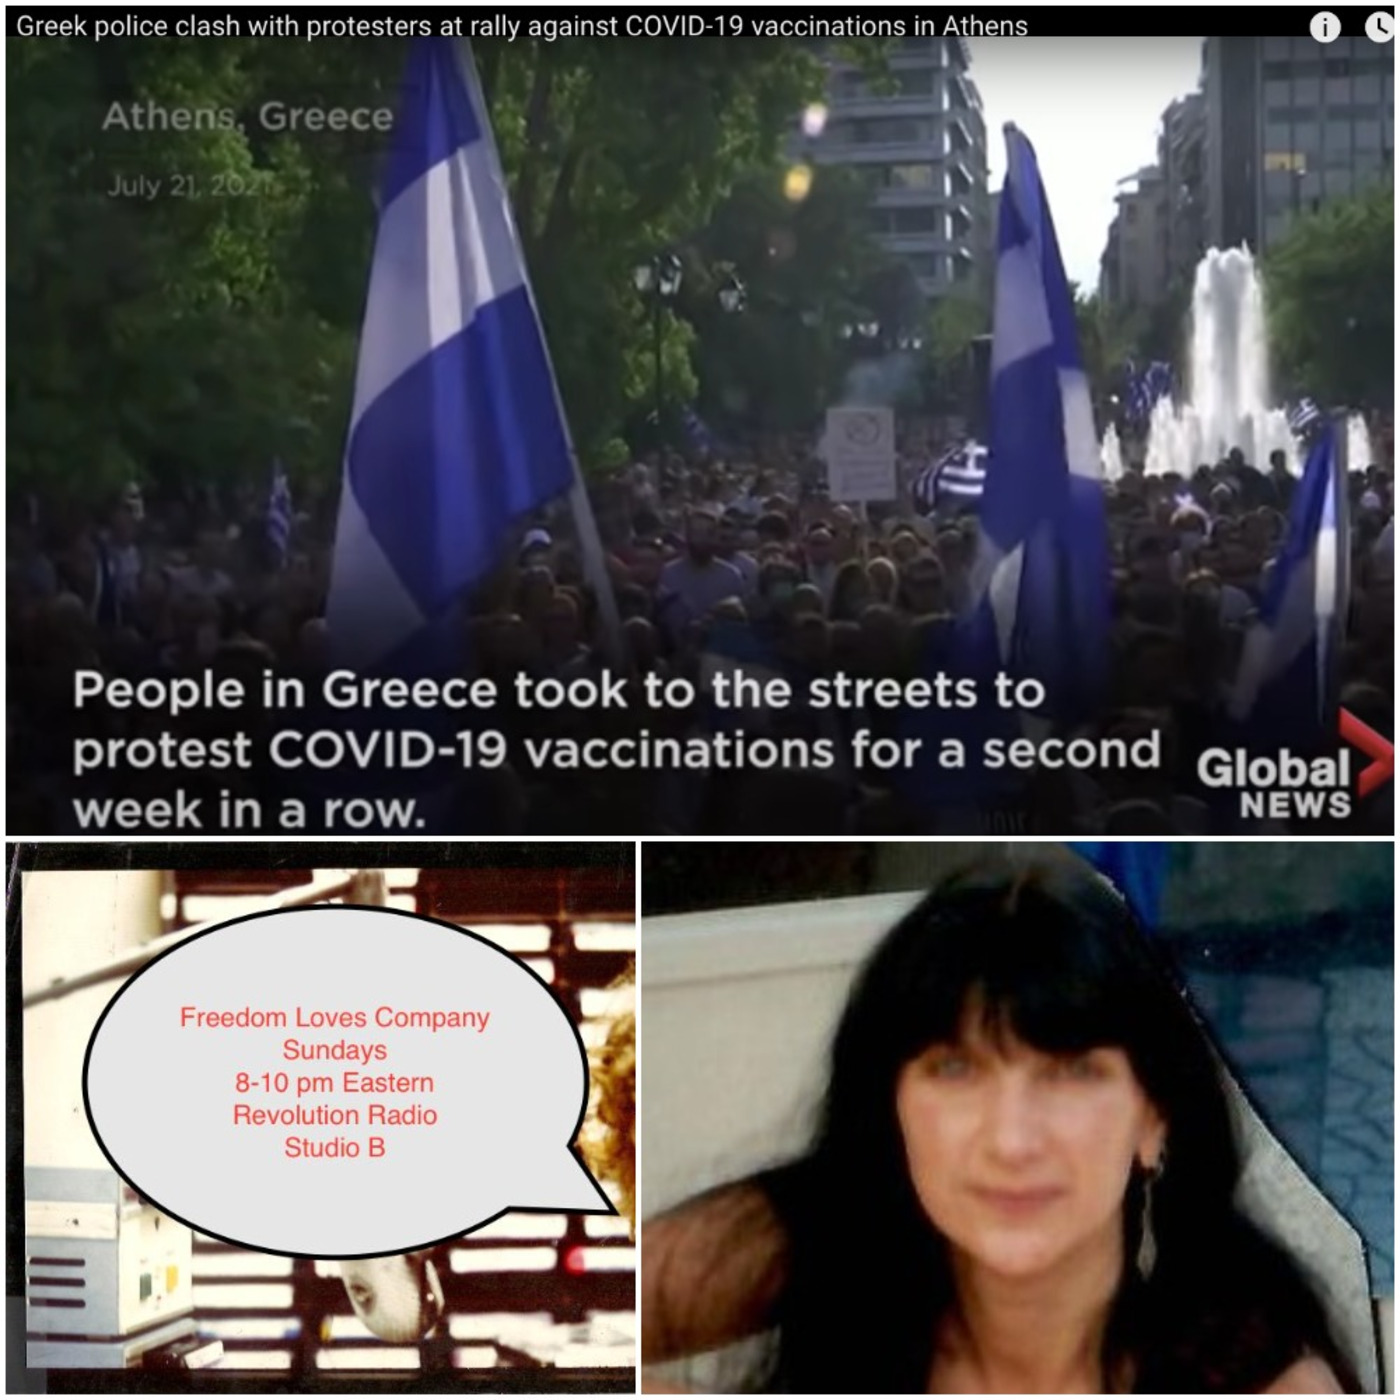 Episode 415: Demonstrating Against Tyranny in Greece: A Conversation with Vivianne Sergianidis